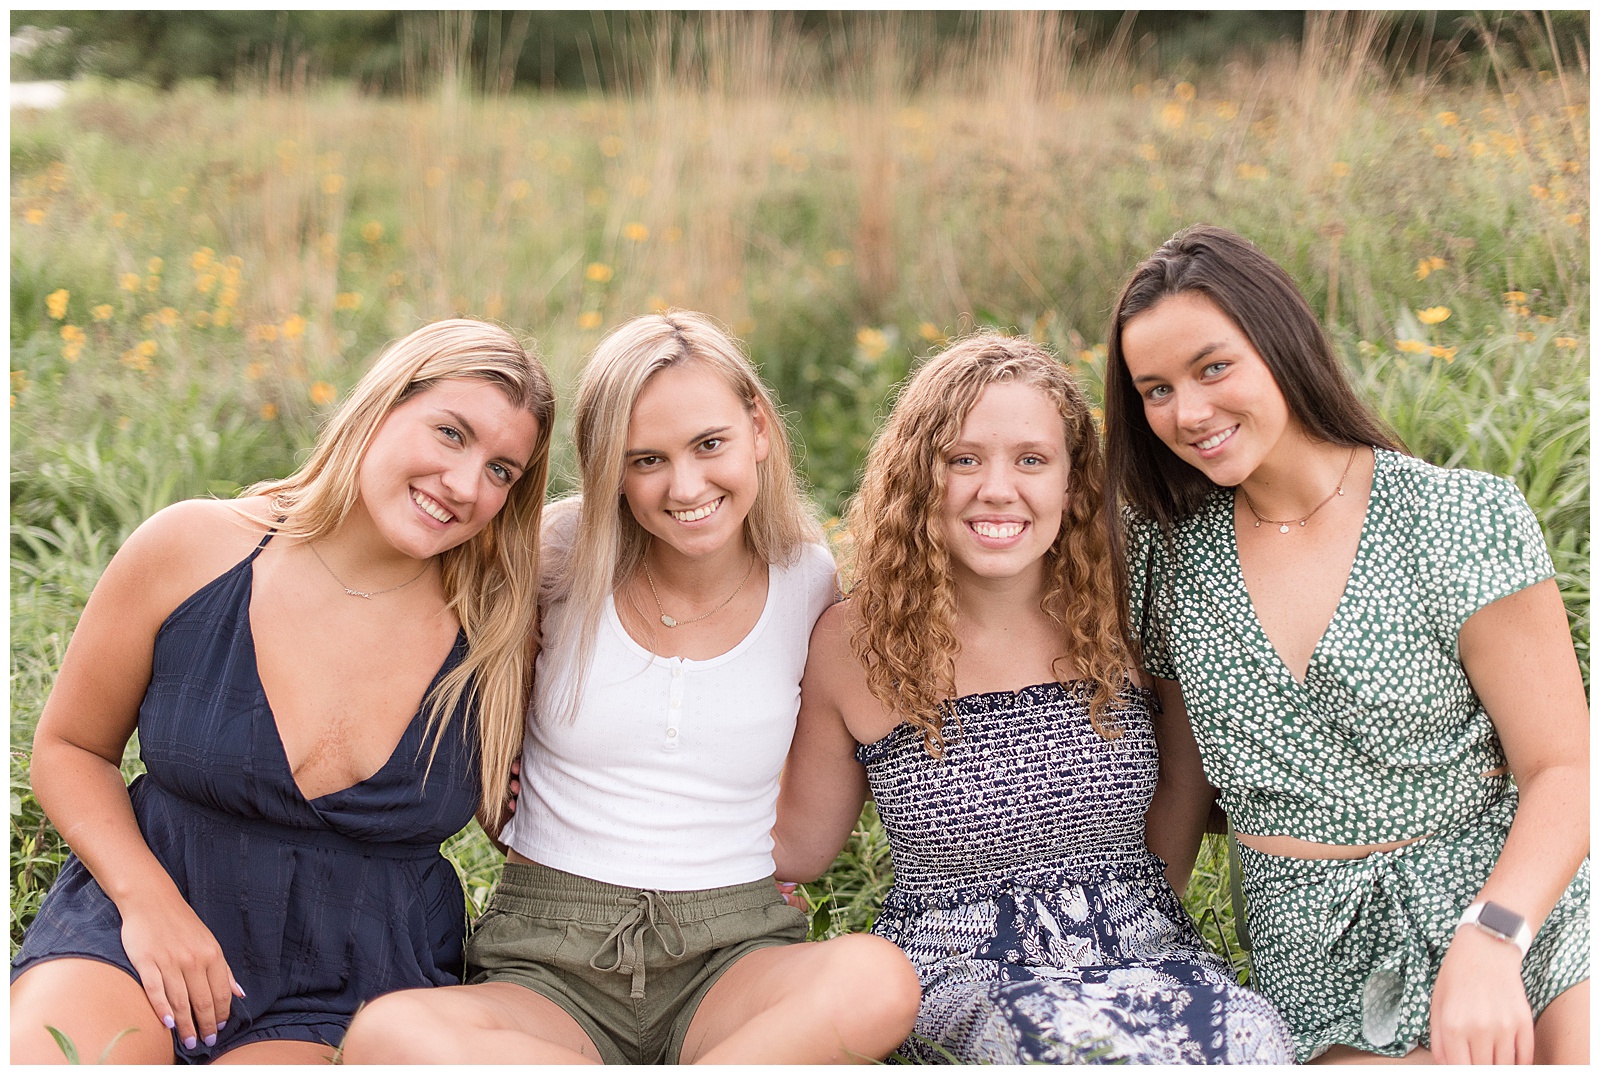 a close-up of all four girls sitting together in the wildflower field with their arms around each other and smiling at the camera